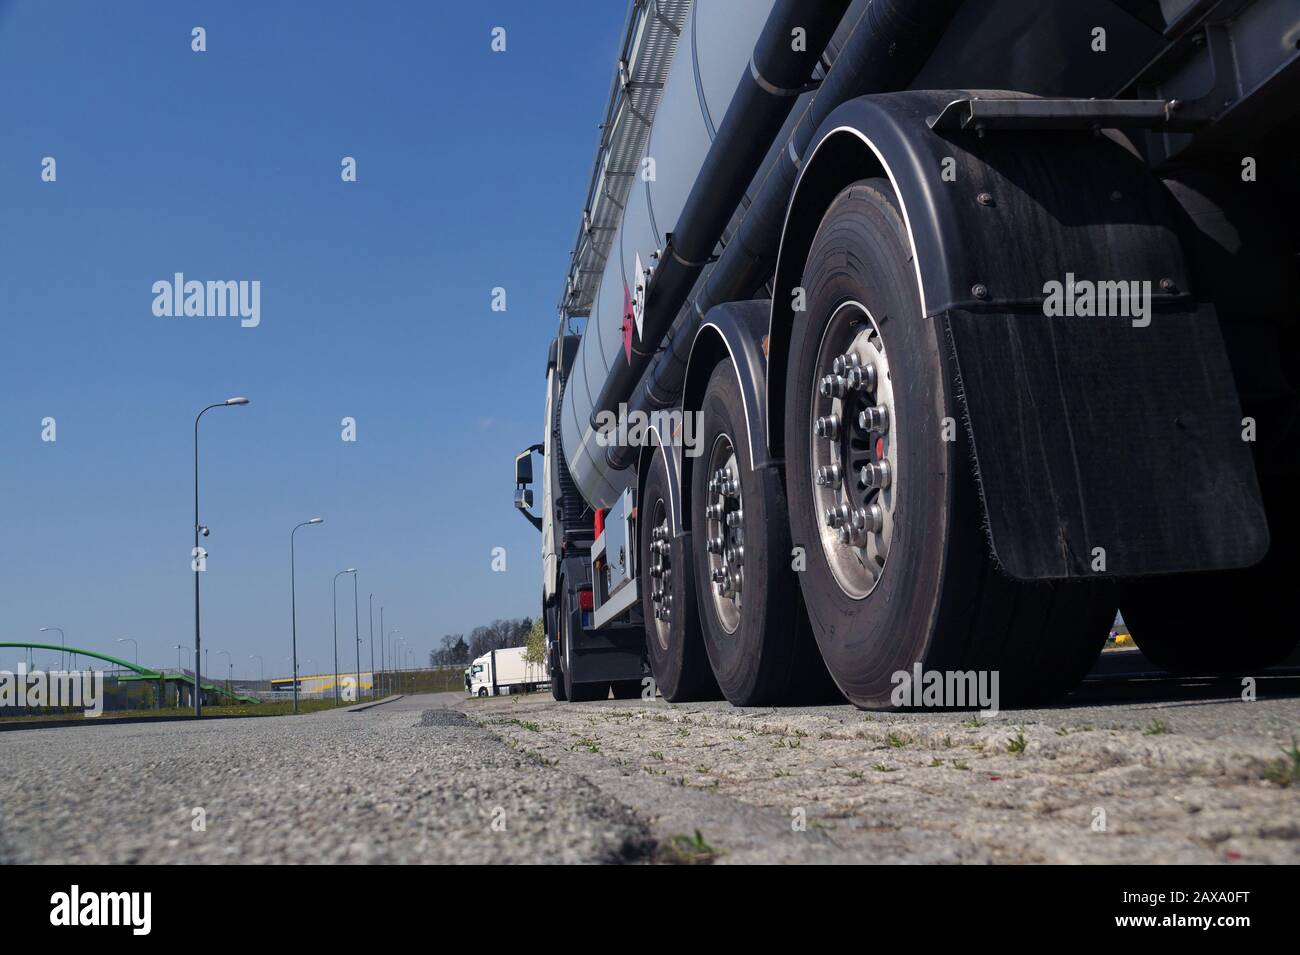 View from the road level. A powerful truck-tanker. Stock Photo